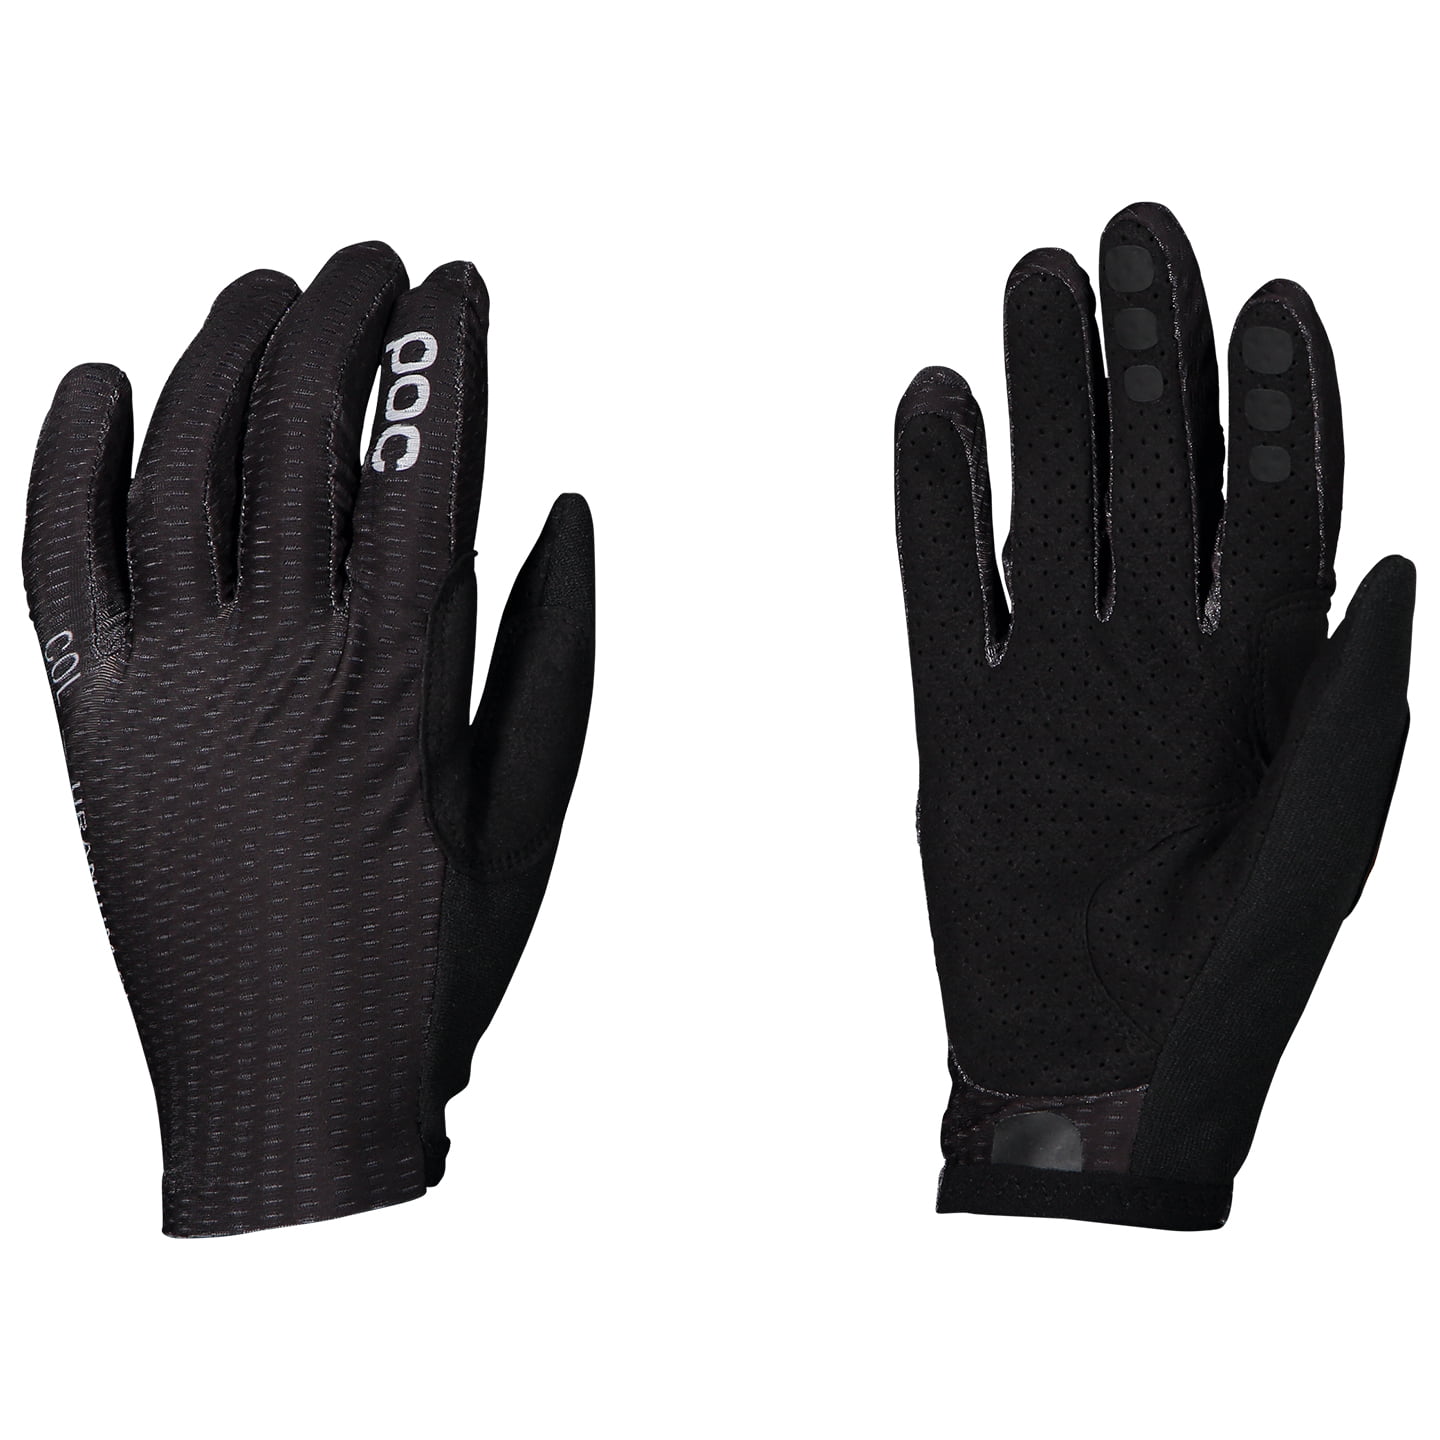 POP Savant MTB Full Finger Gloves Cycling Gloves, for men, size XL, Cycling gloves, Cycle gear